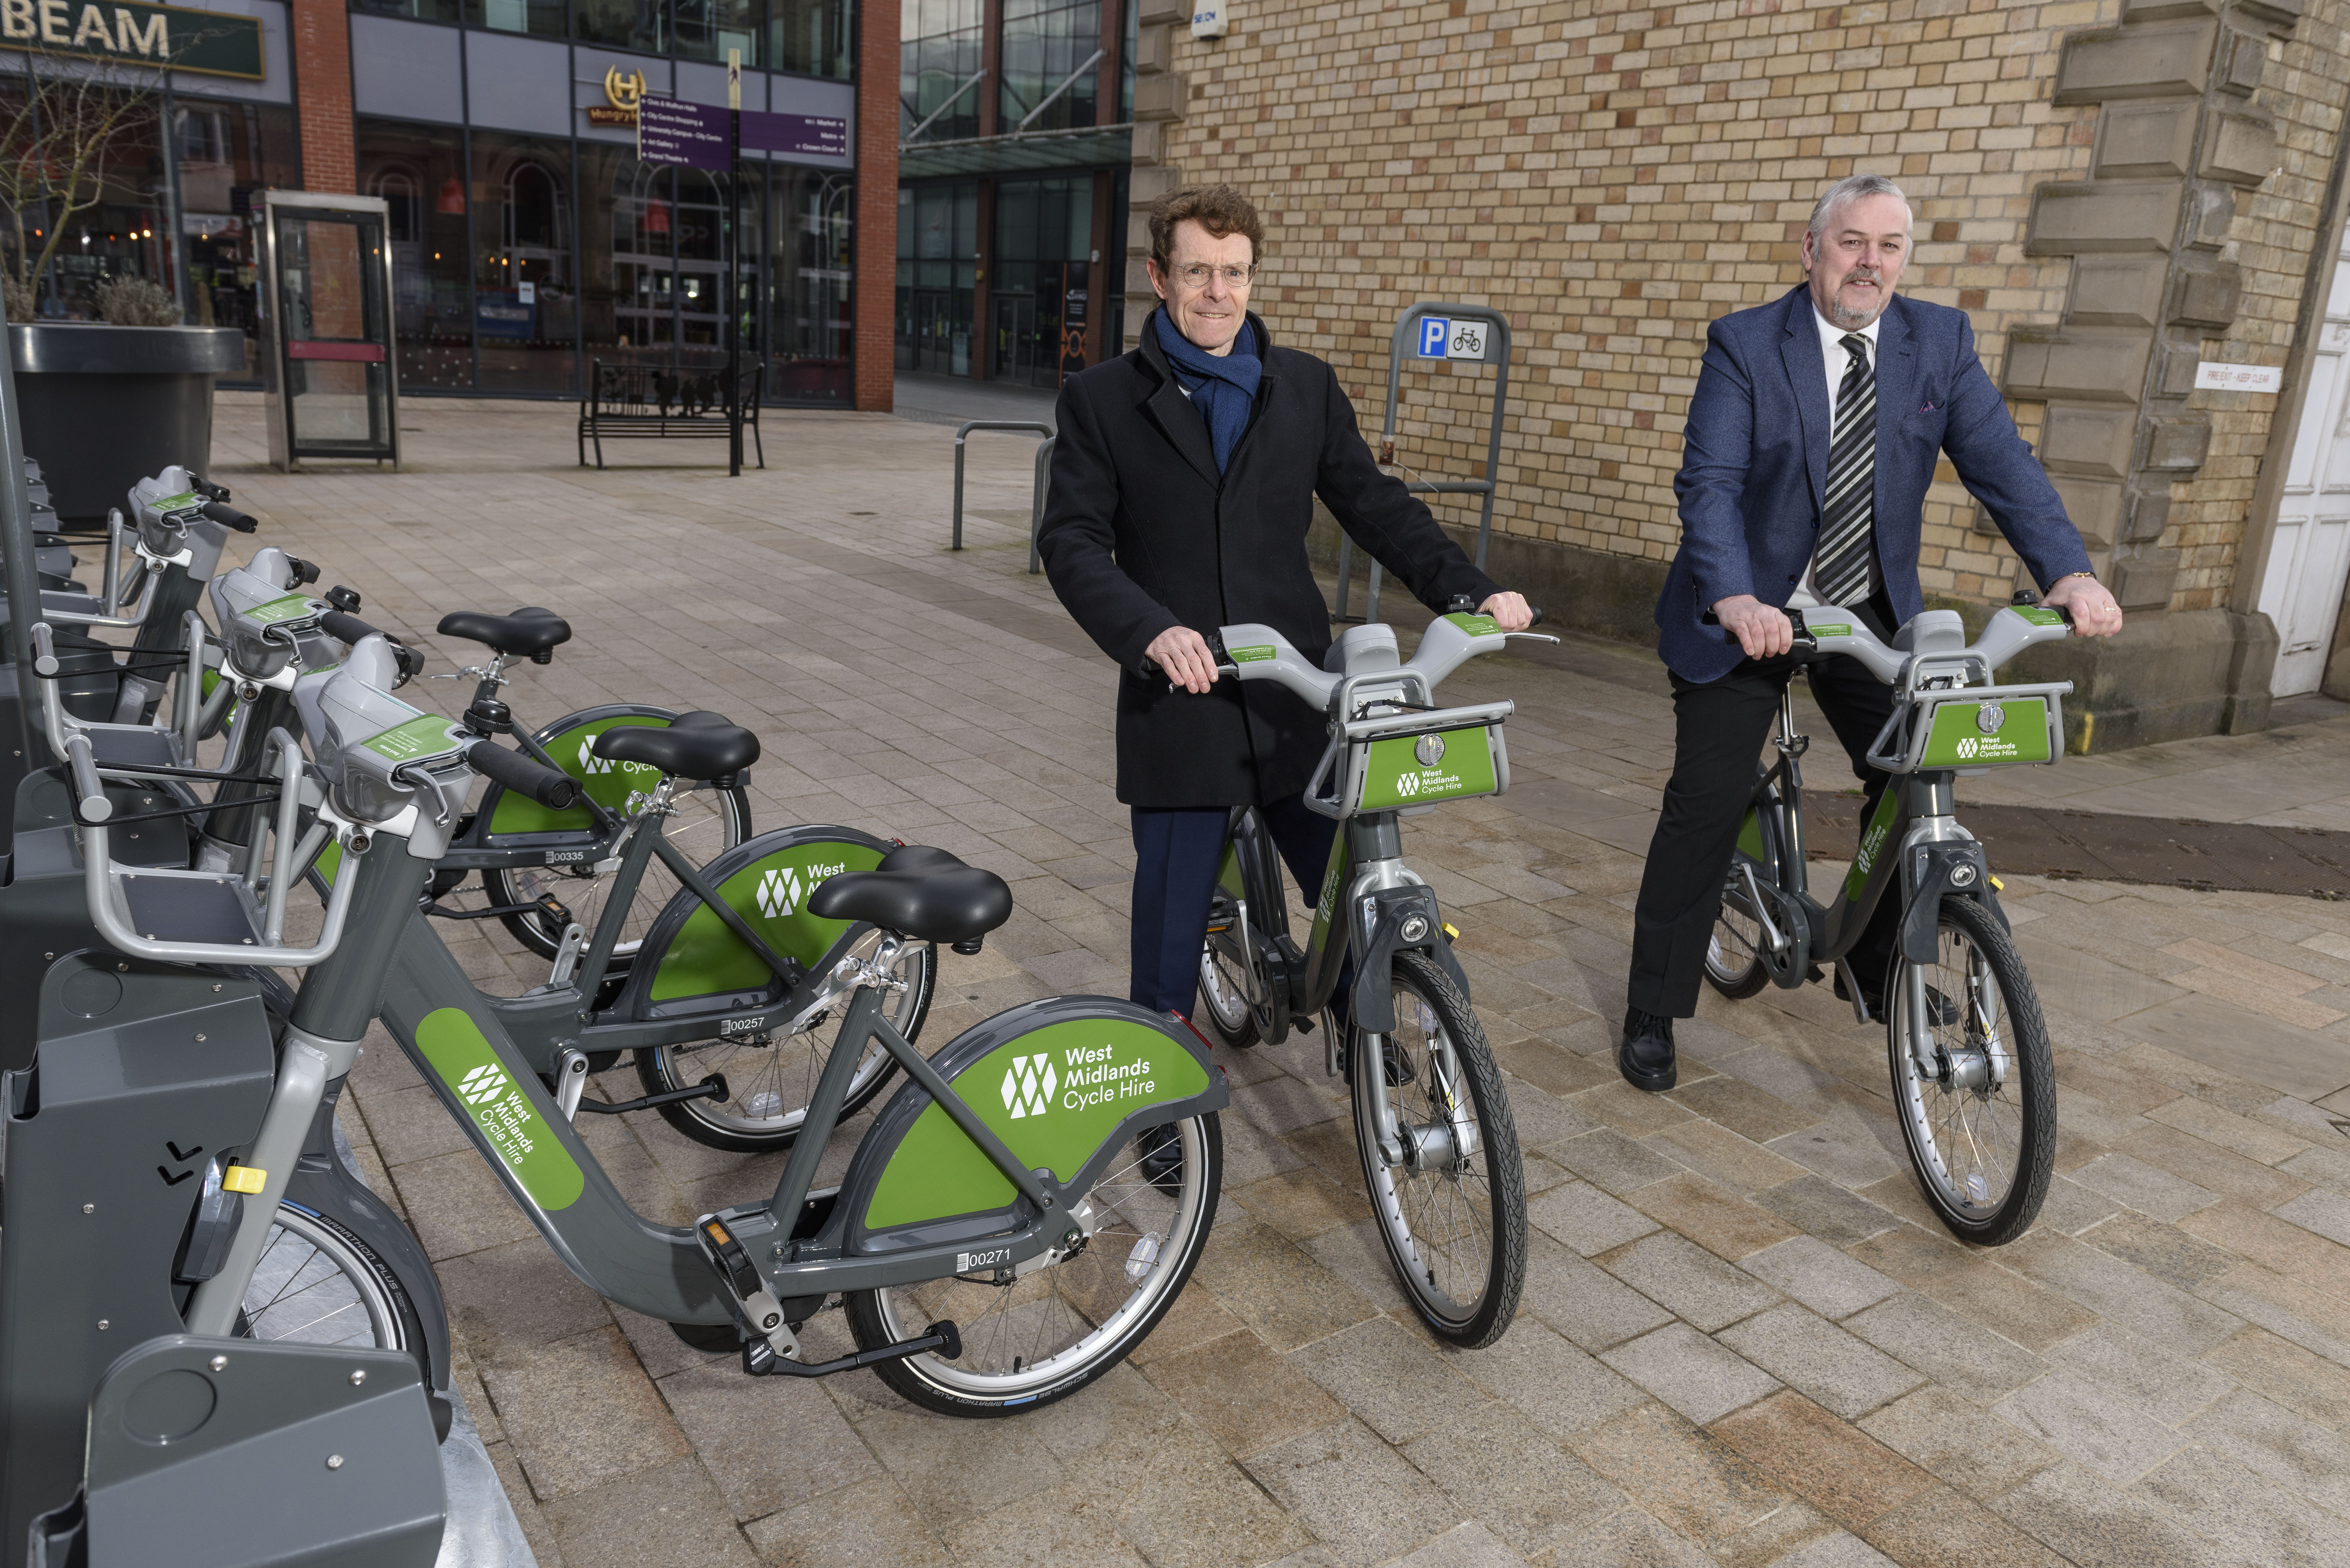 Mayor Andy Street and Cllr Ian Brookfield check out the new bikes